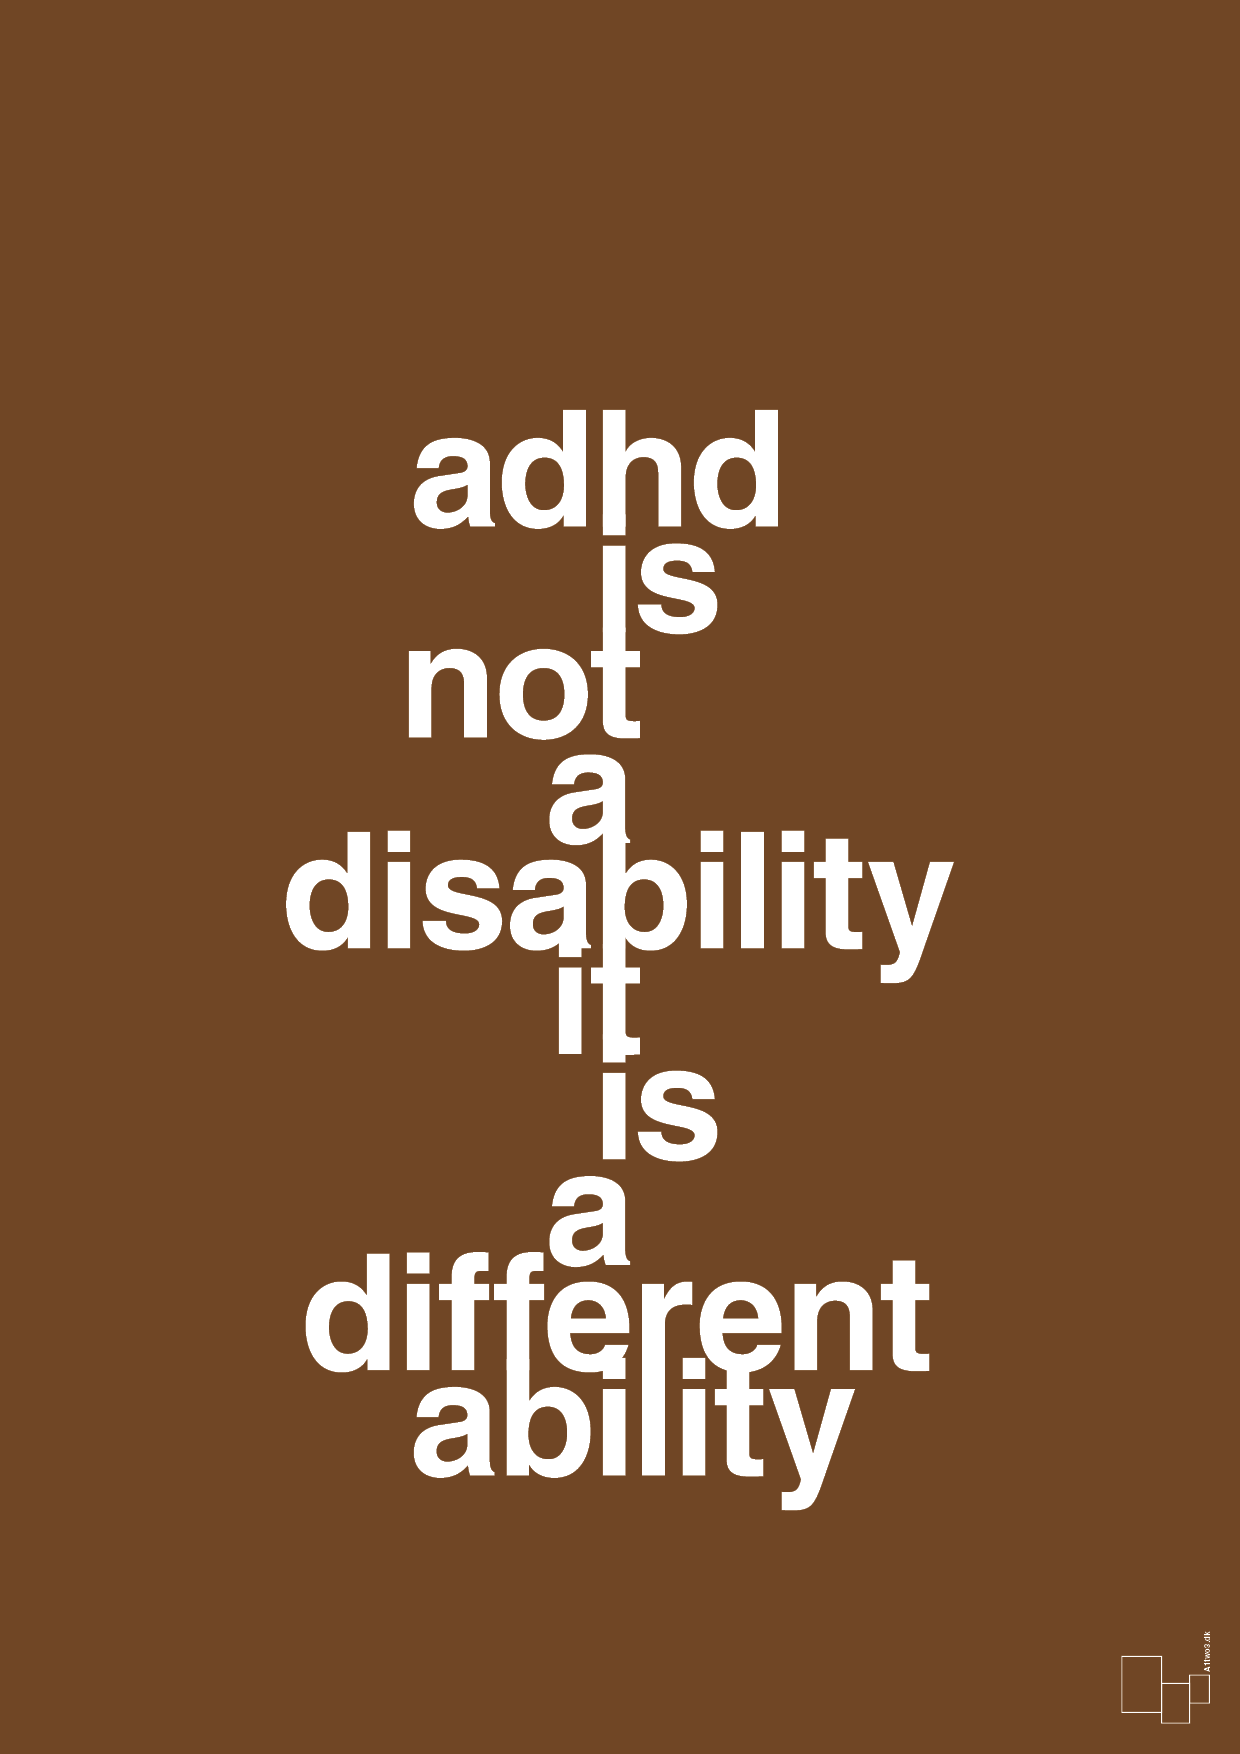 adhd is not a disability it is a different ability - Plakat med Samfund i Dark Brown